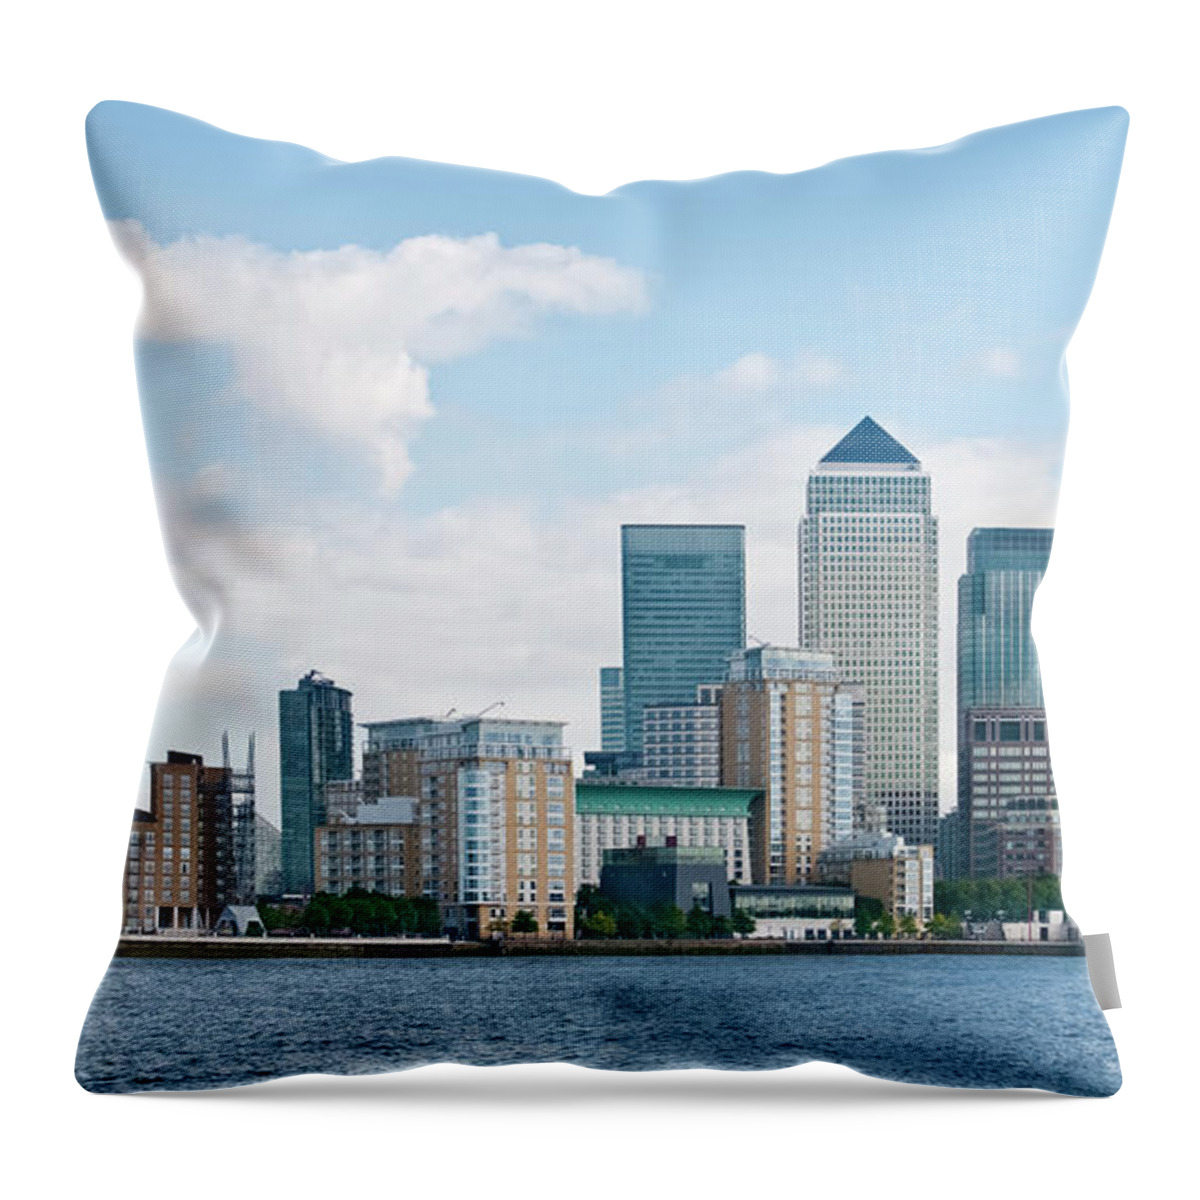 Corporate Business Throw Pillow featuring the photograph Canary Wharf Cityscape by Onebluelight